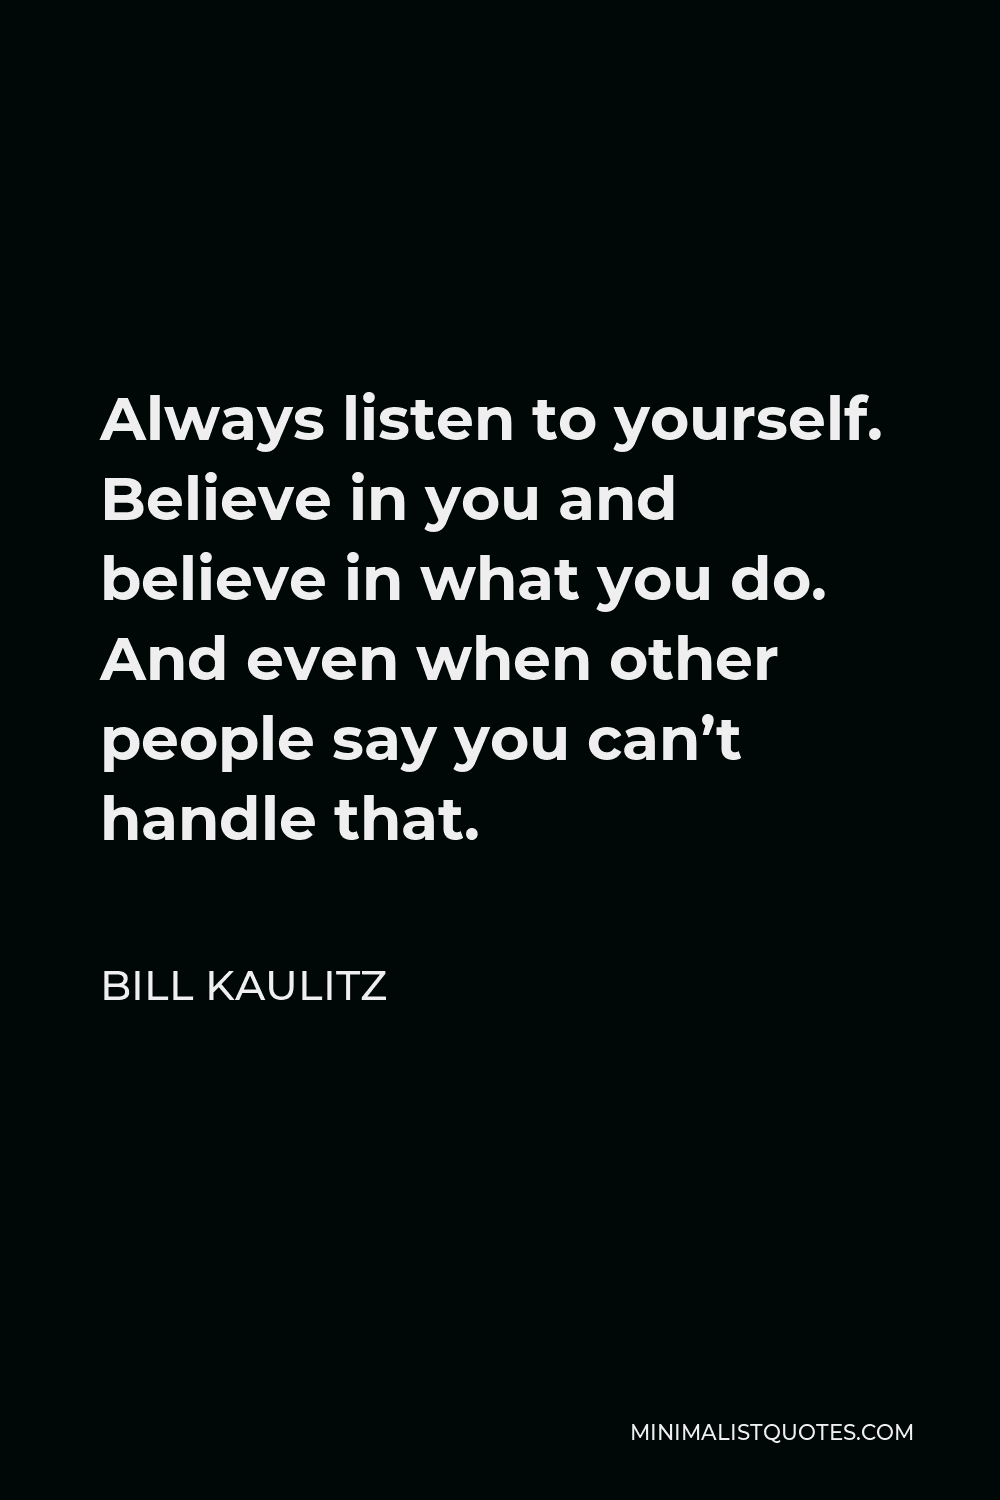 Bill Kaulitz Quote - Always listen to yourself. Believe in you and believe in what you do. And even when other people say you can’t handle that.